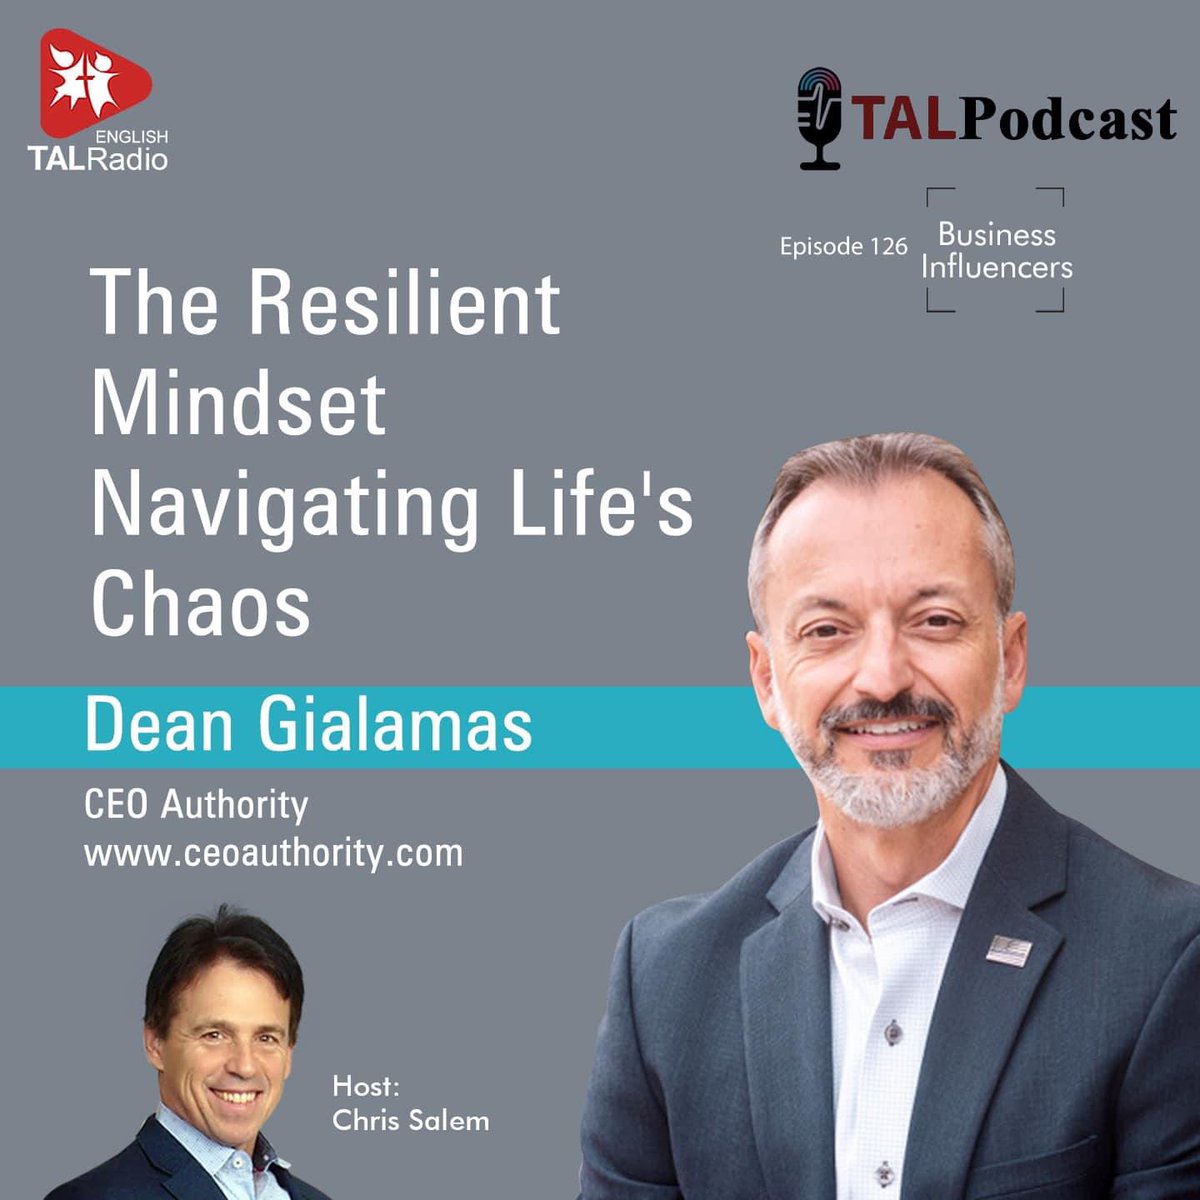 Business Influencers Podcast Dean Gialamas The Resilient Mindset: Navigating Life’s Chaos TAL Radio: v1.talgiving.org/api/v1/url/aGd… Apple Podcasts: open.spotify.com/episode/6BuDa8… Spotify: open.spotify.com/episode/6BuDa8… YouTube: youtu.be/8rF9J4UOd2I #BusinessInfluencers #podcast